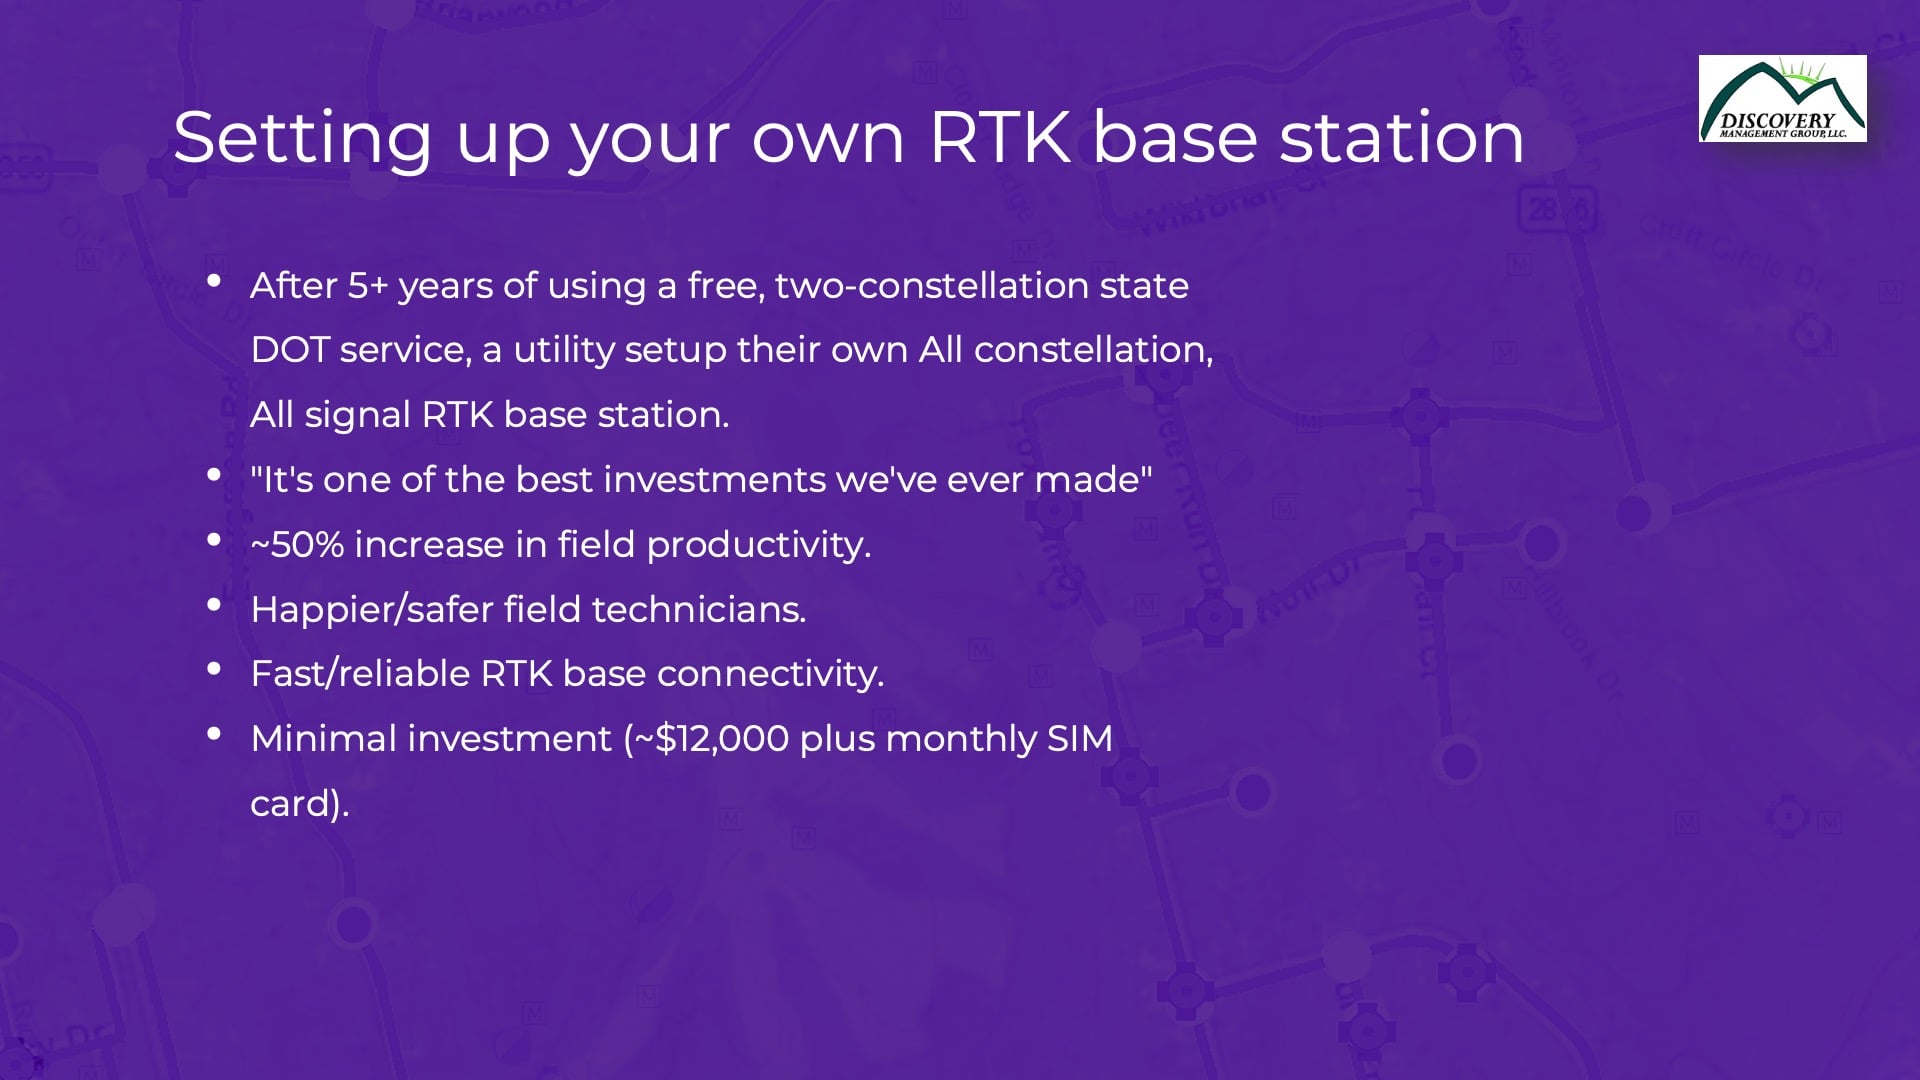 How to set up your own RTK base station